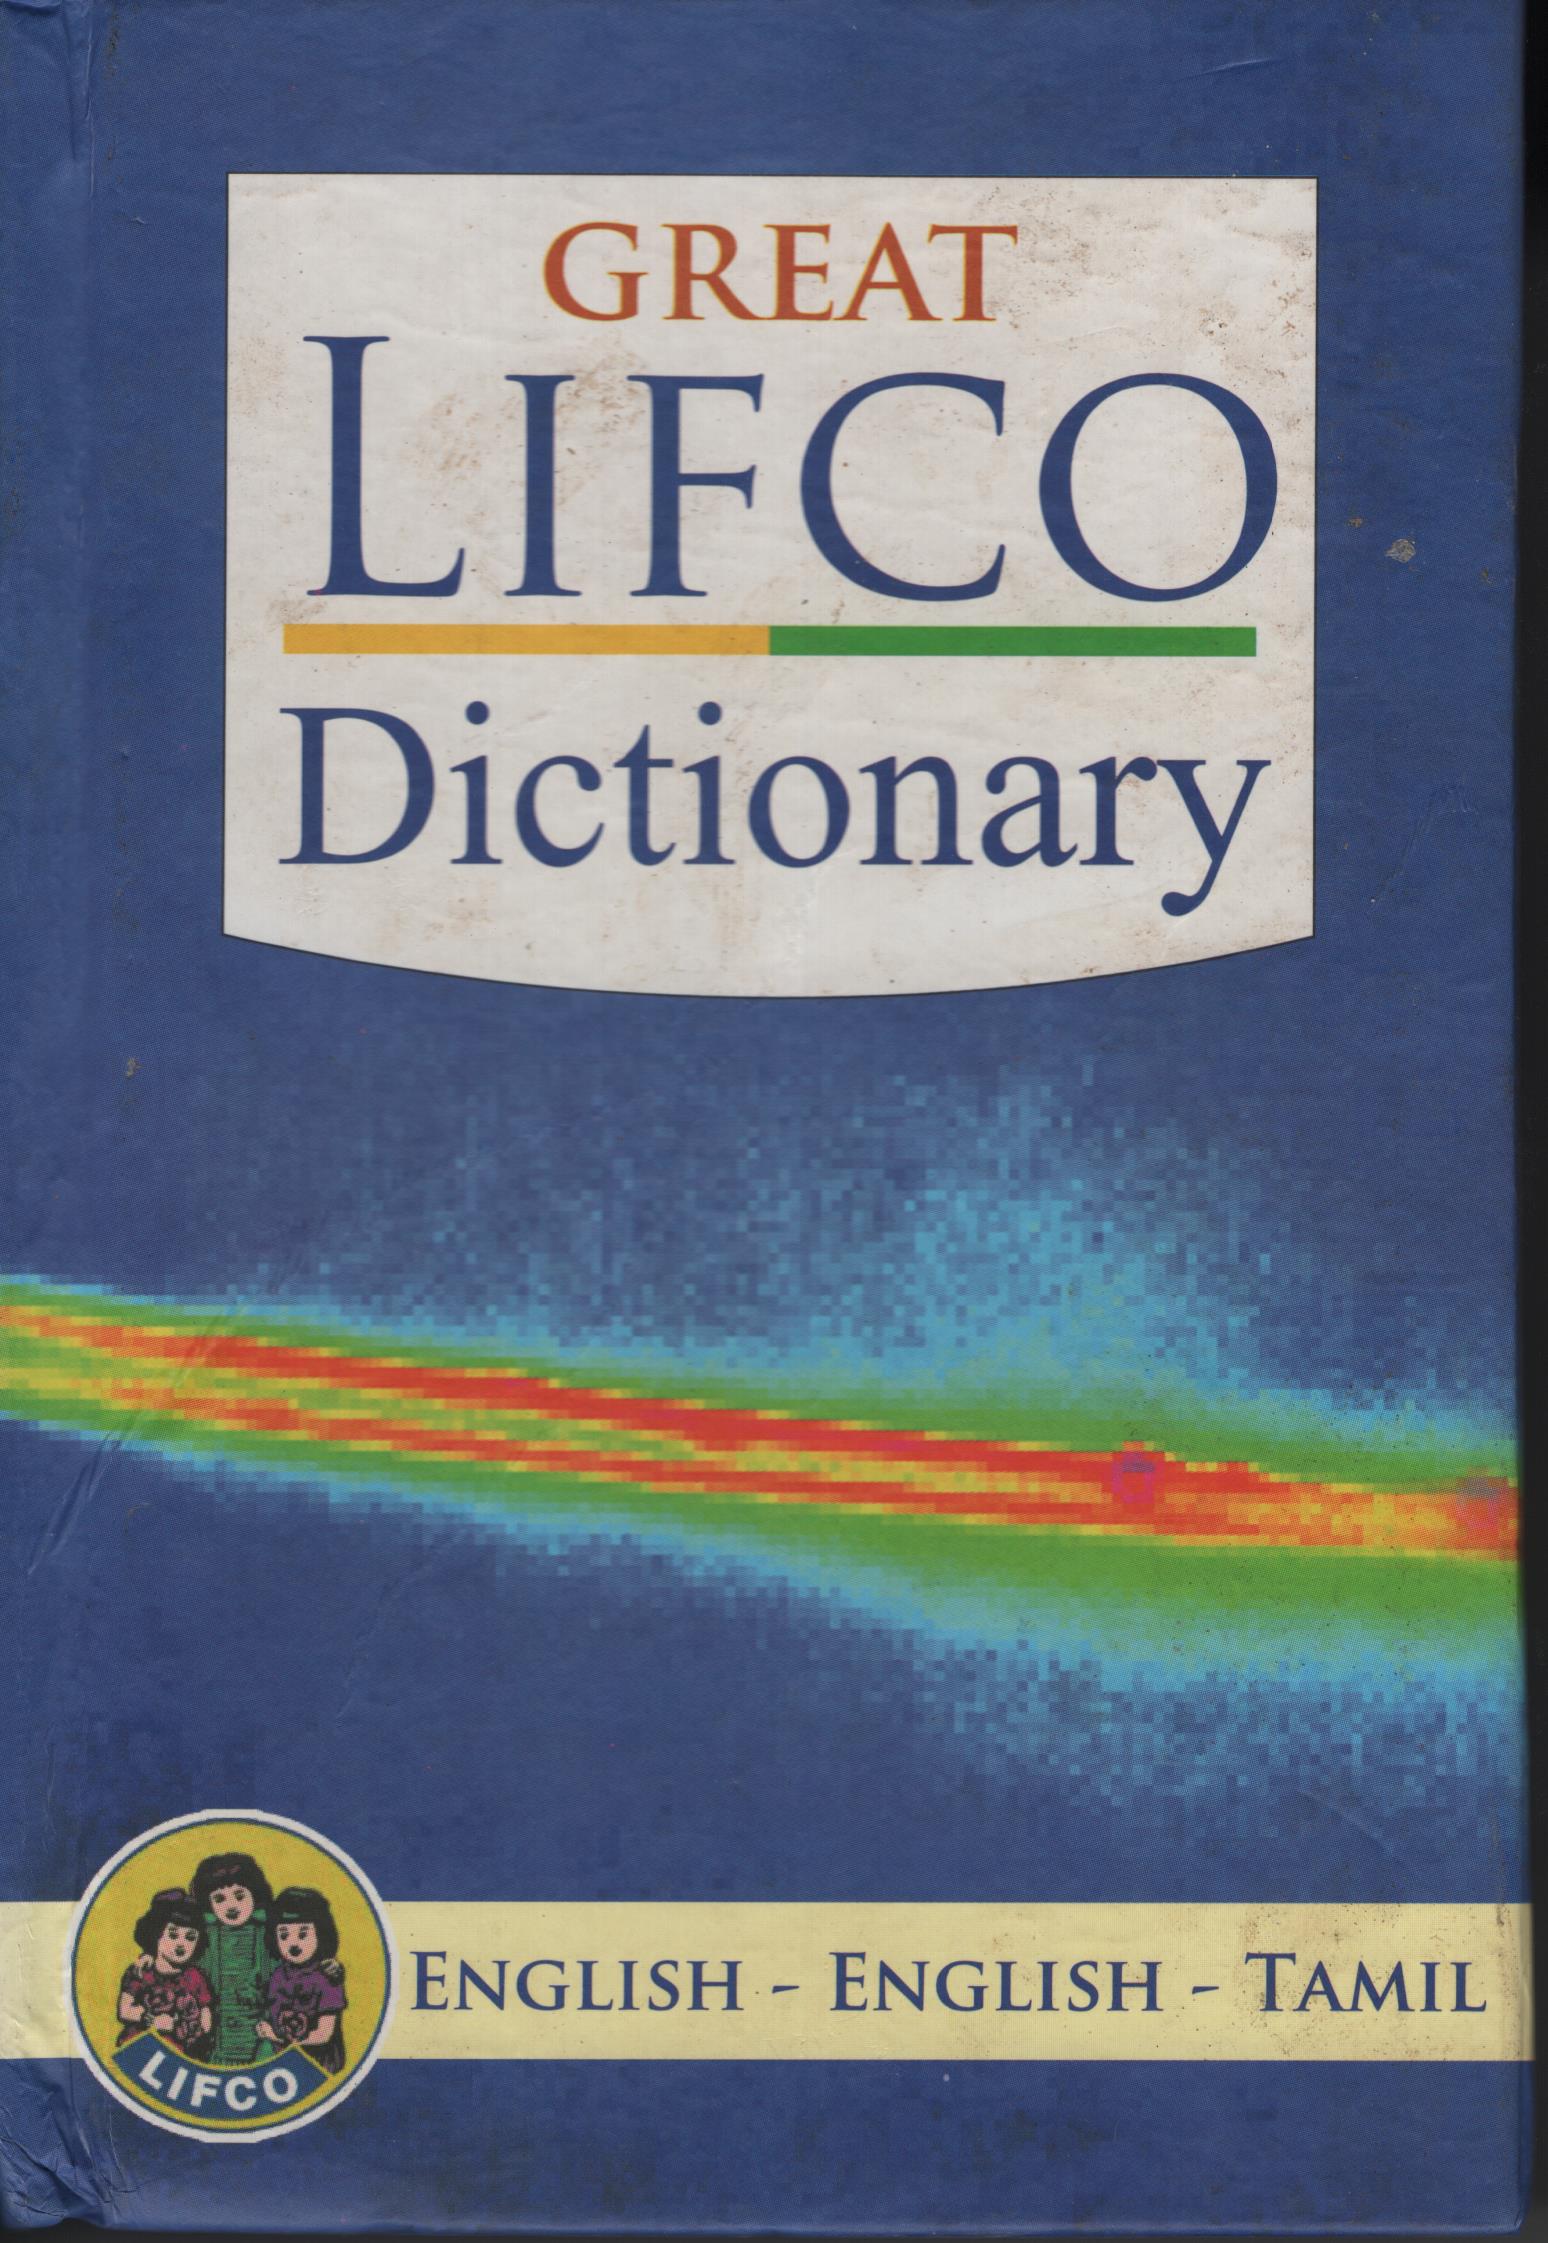 The Great Lifco Dictionary